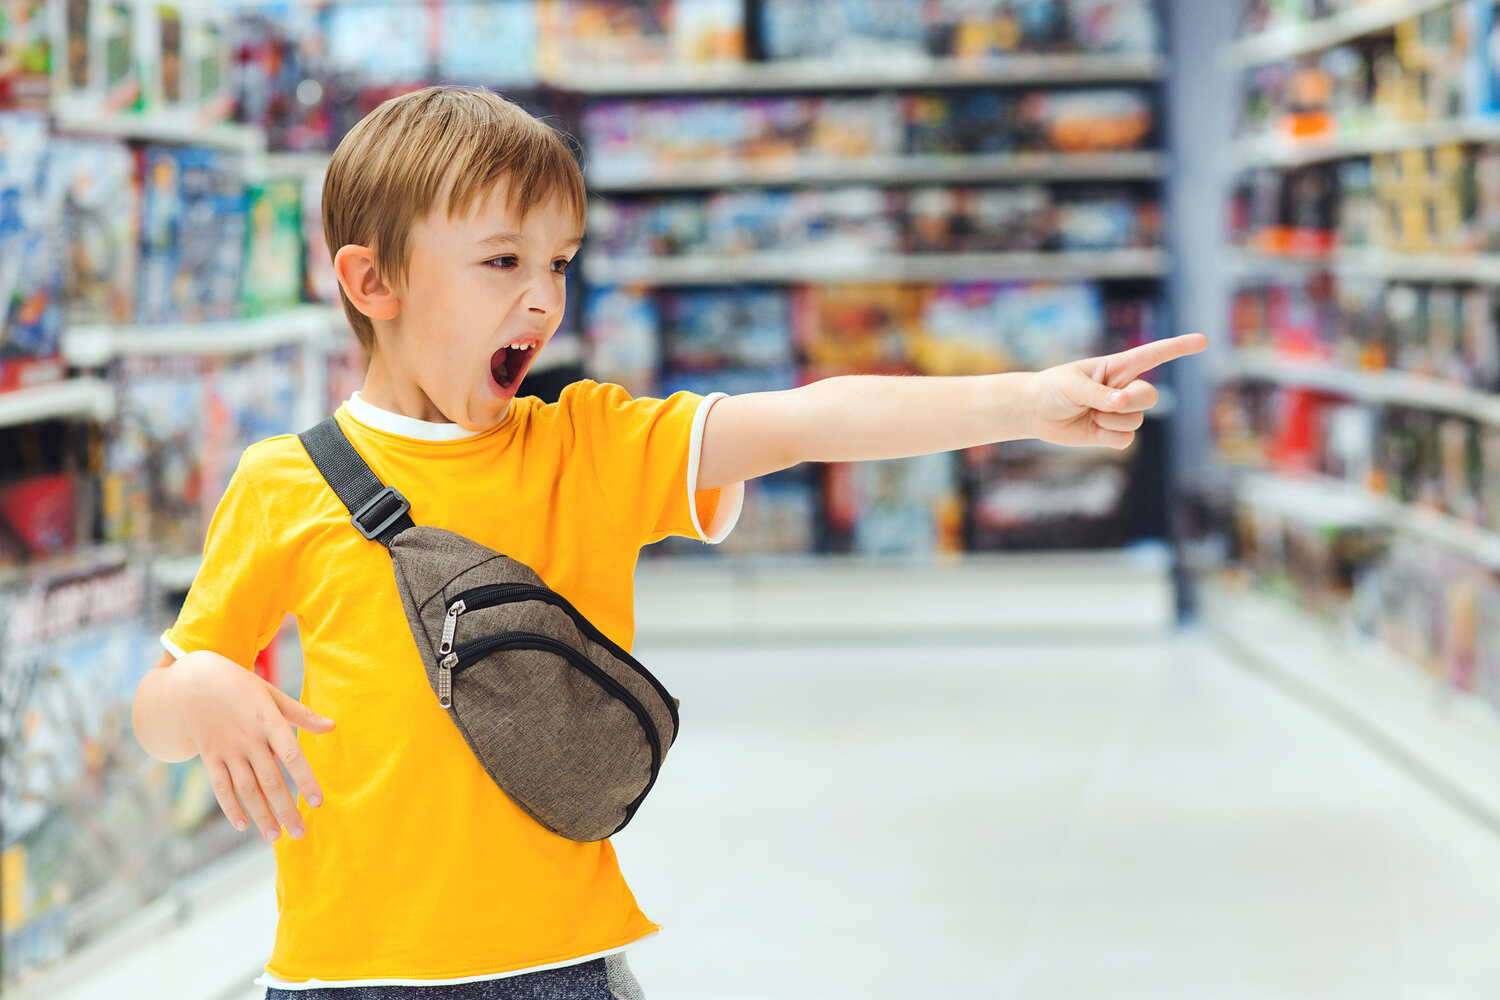 A child shouting in store